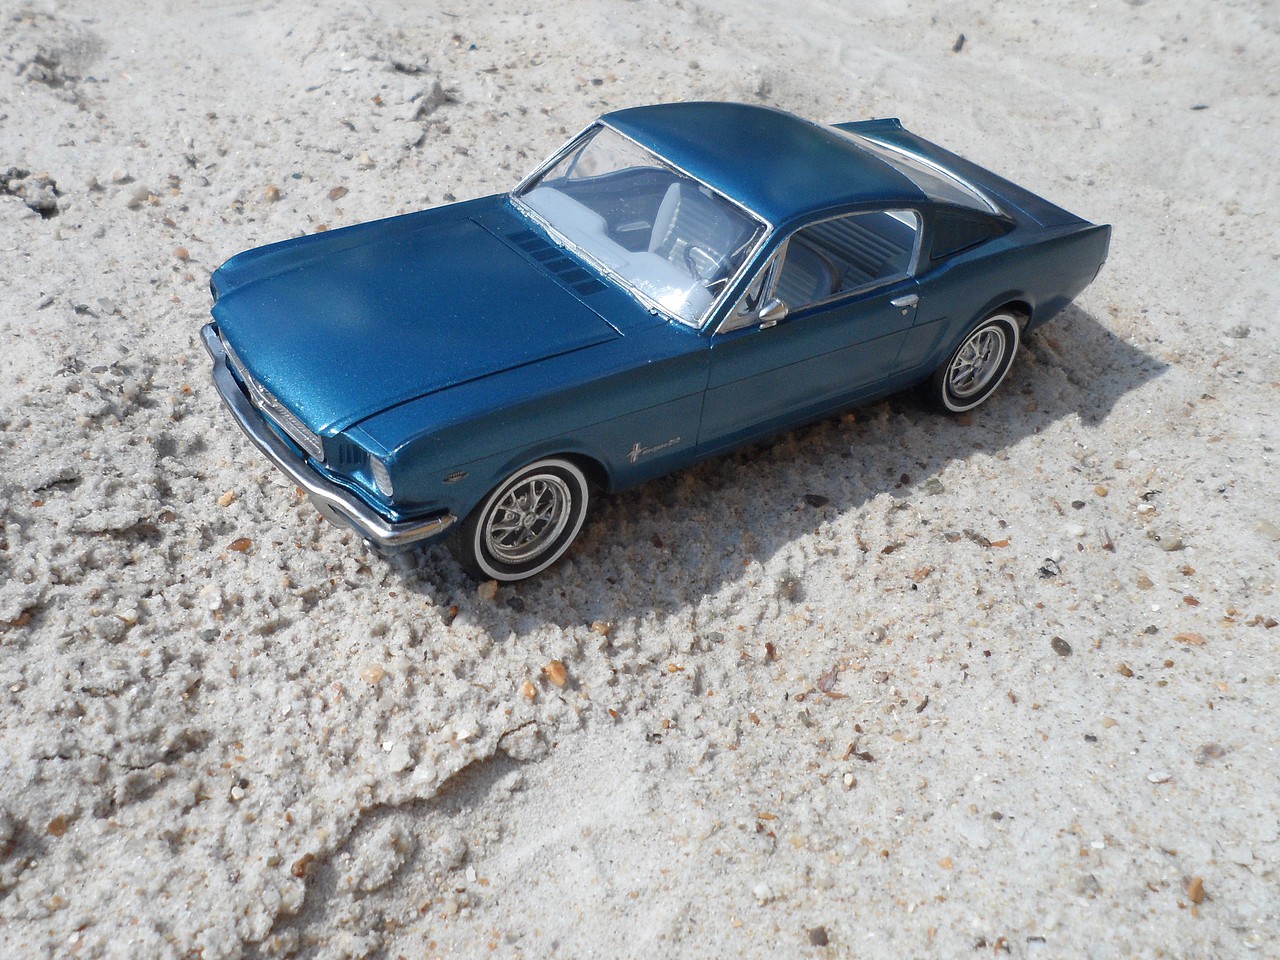 Revell - Maquette voiture : 1965 Ford Mustang 2+2 Fastback